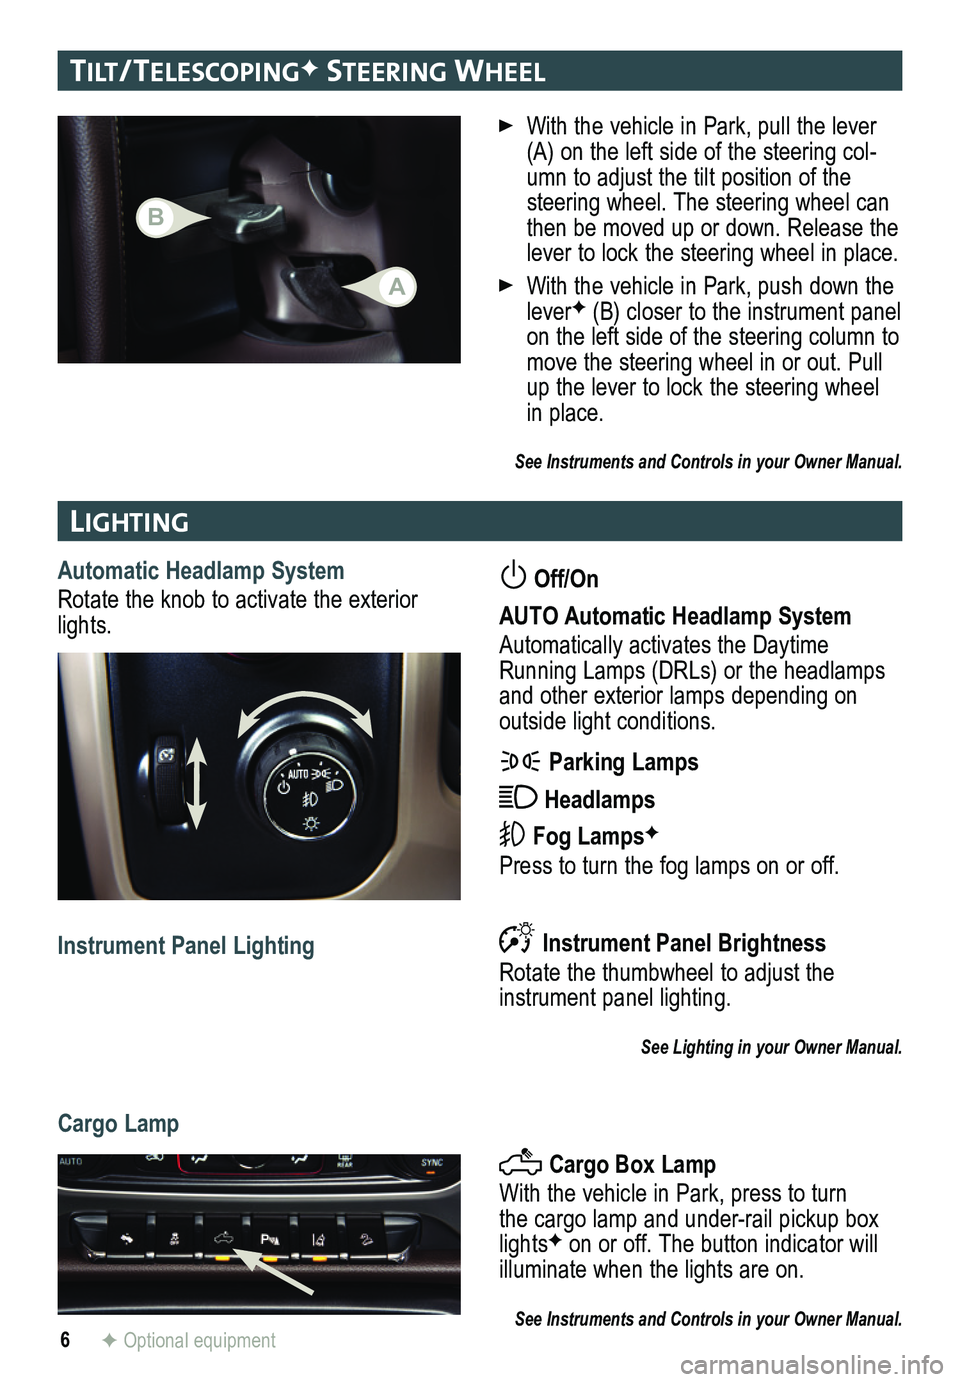 GMC SIERRA 2015  Get To Know Guide 6
lIgHtIng
Automatic Headlamp System
Rotate the knob to activate the exterior lights.
 Off/On 
AUTO Automatic Headlamp System
Automatically activates the Daytime Running Lamps (DRLs) or the headlamps 